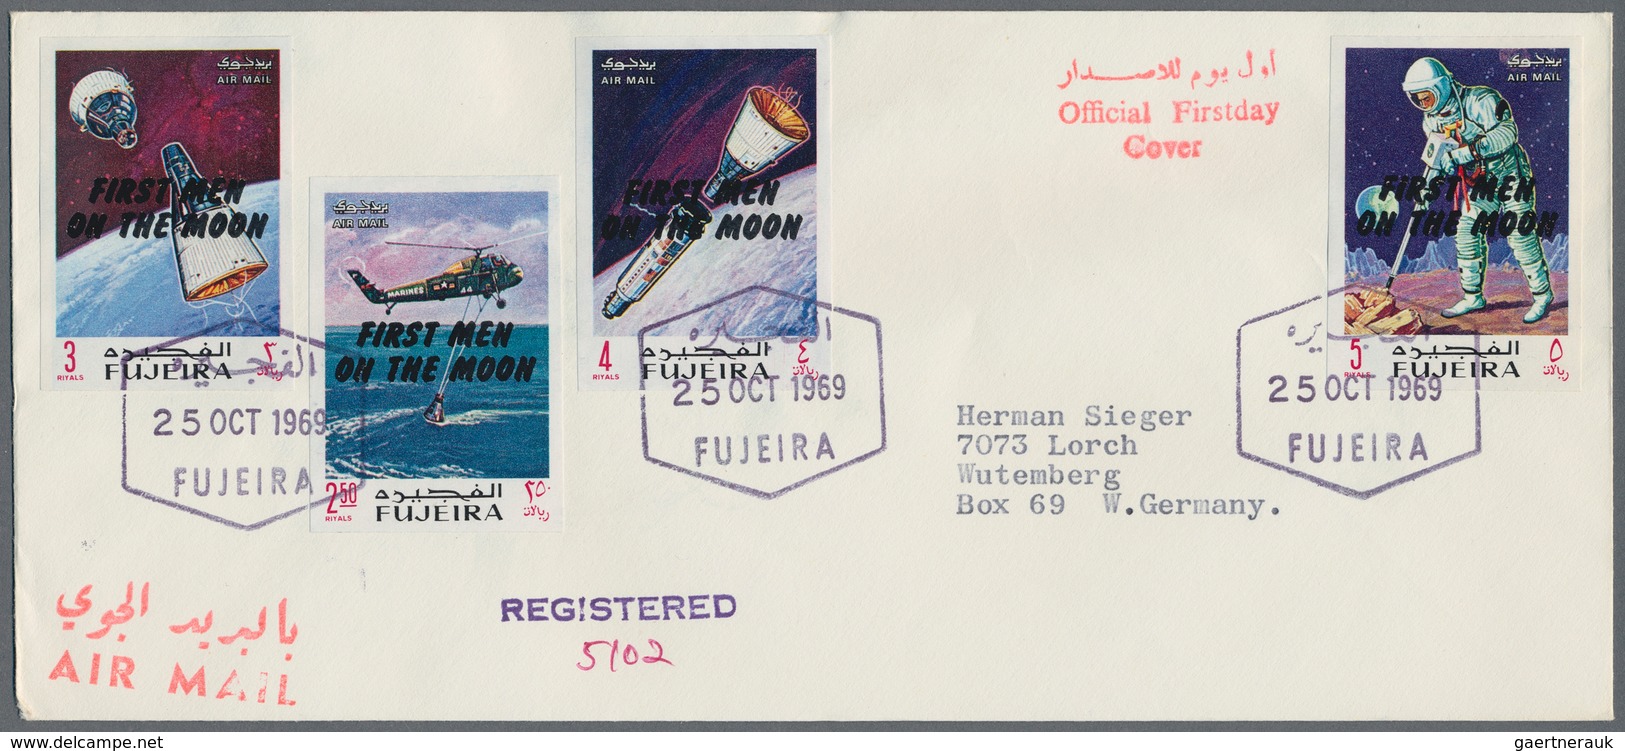 Fudschaira / Fujeira: 1969, APOLLO, group of 18 covers: Michel nos. 399/407 A and A 399/407 A on fou